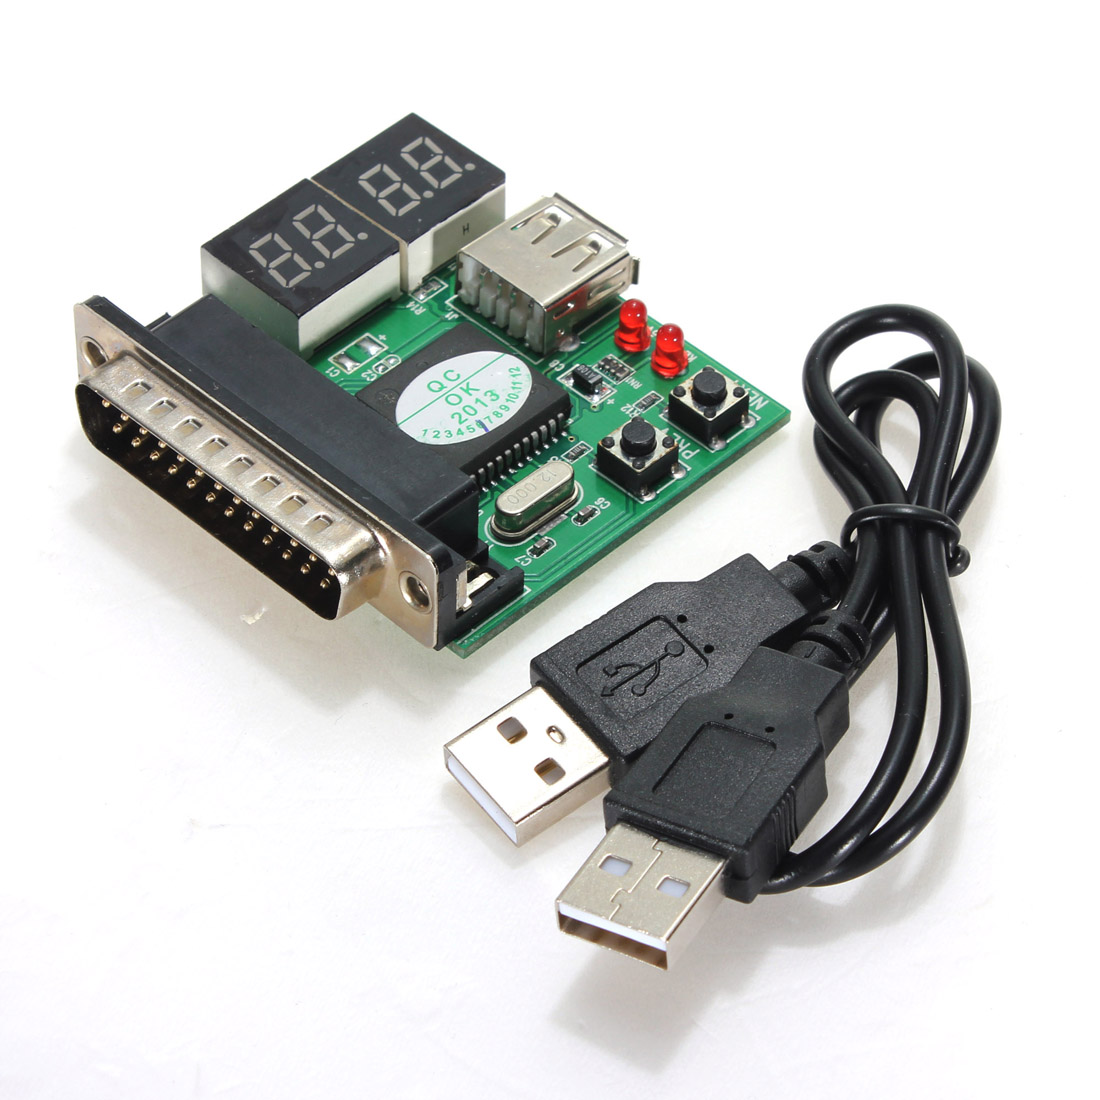 

3pcs Computer Accessories PC Diagnostic Card USB Post Card Motherboard Analyzer Tester for Notebook Laptop